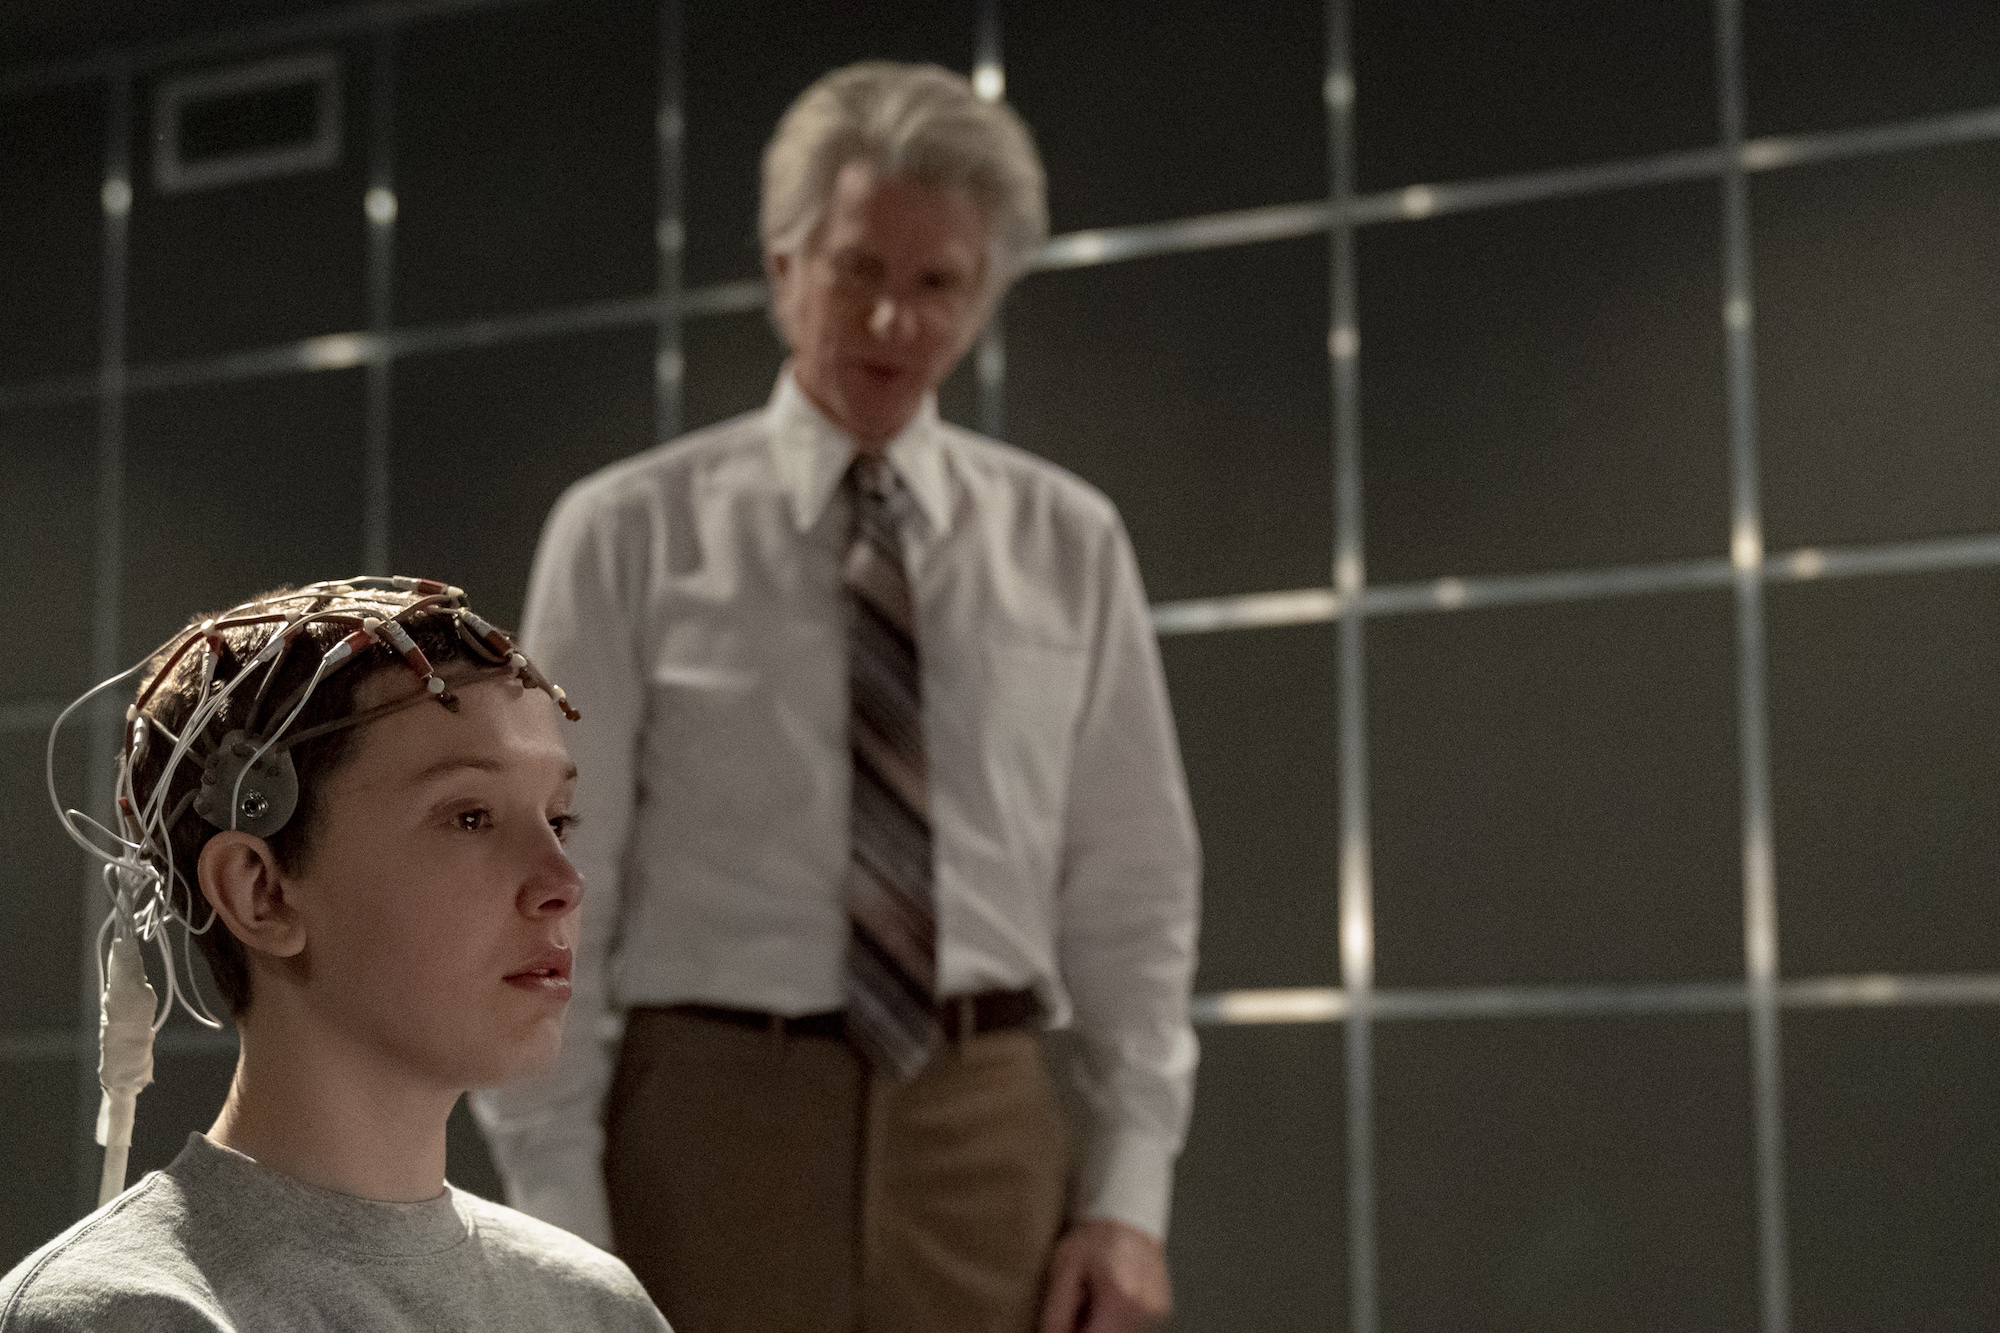 'Stranger Things 4' character Dr. Brenner looking at Eleven in the lab.